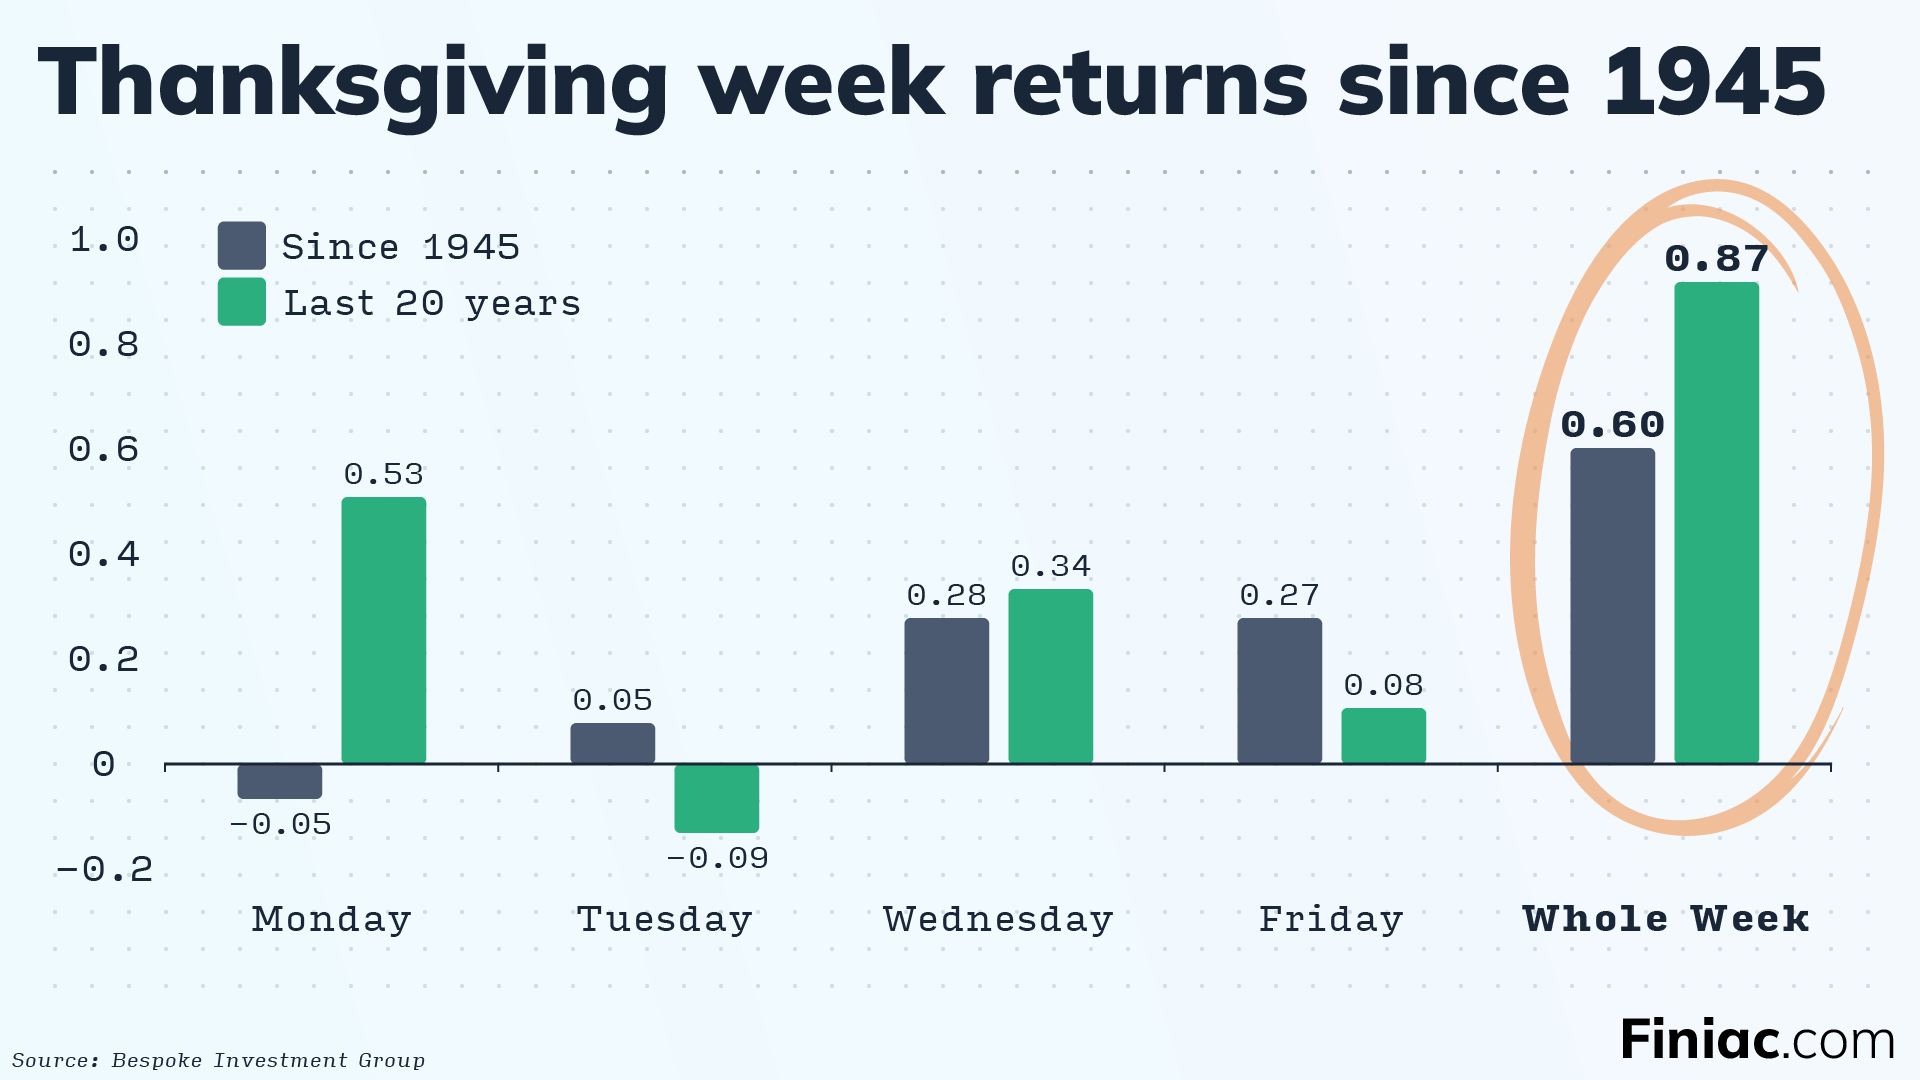 Day-by-day breakdown of stock market returns during the week of Thanksgiving.